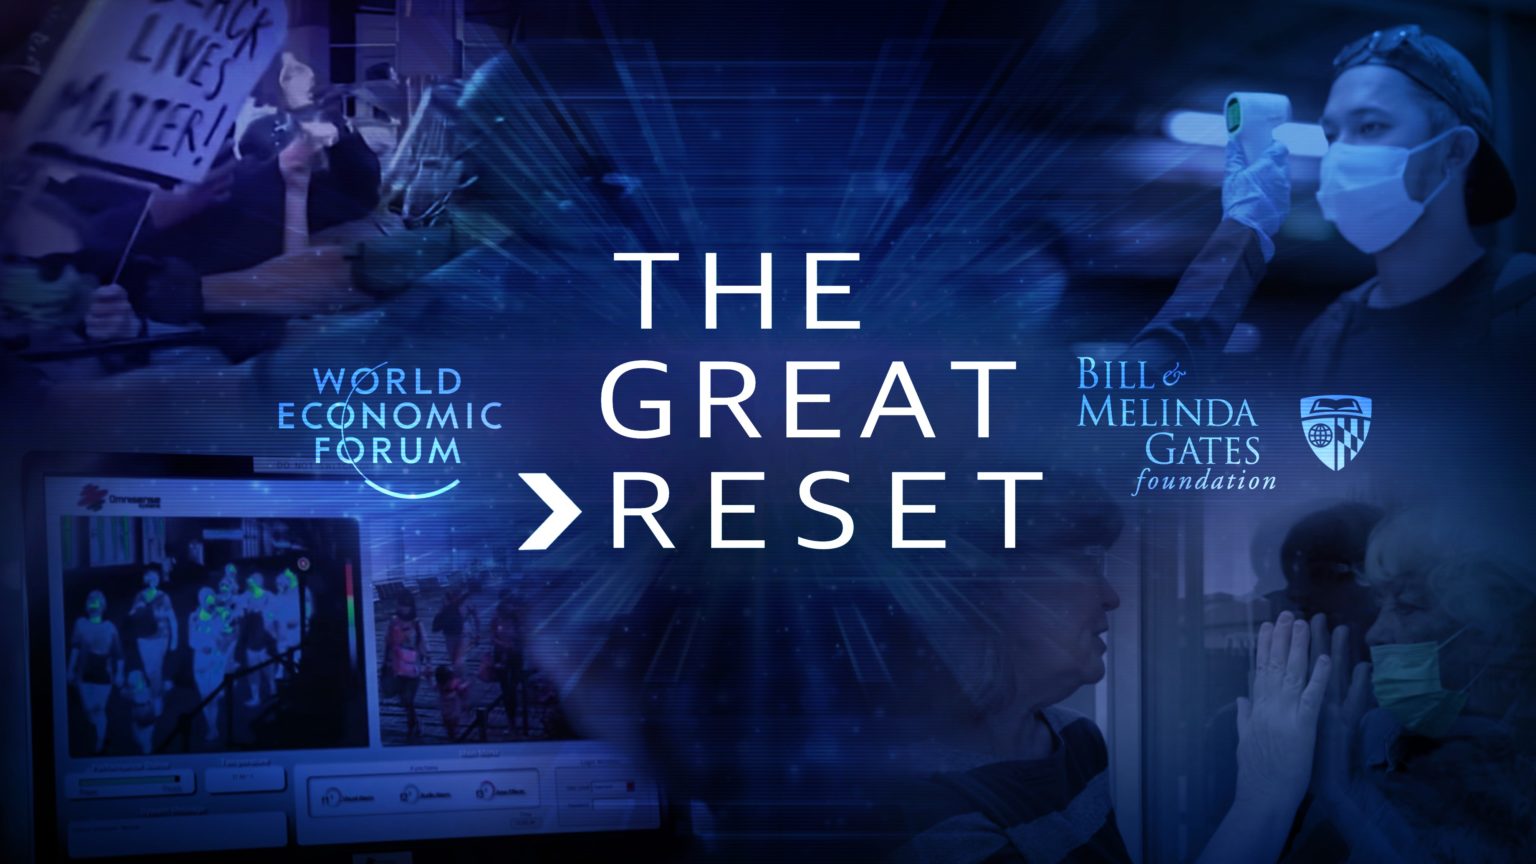 The Great Reset – Controlled Demolition for a New World – C76CDD03-5C80-4DCB-A3B8-AA48FE38A7EB-1536x864